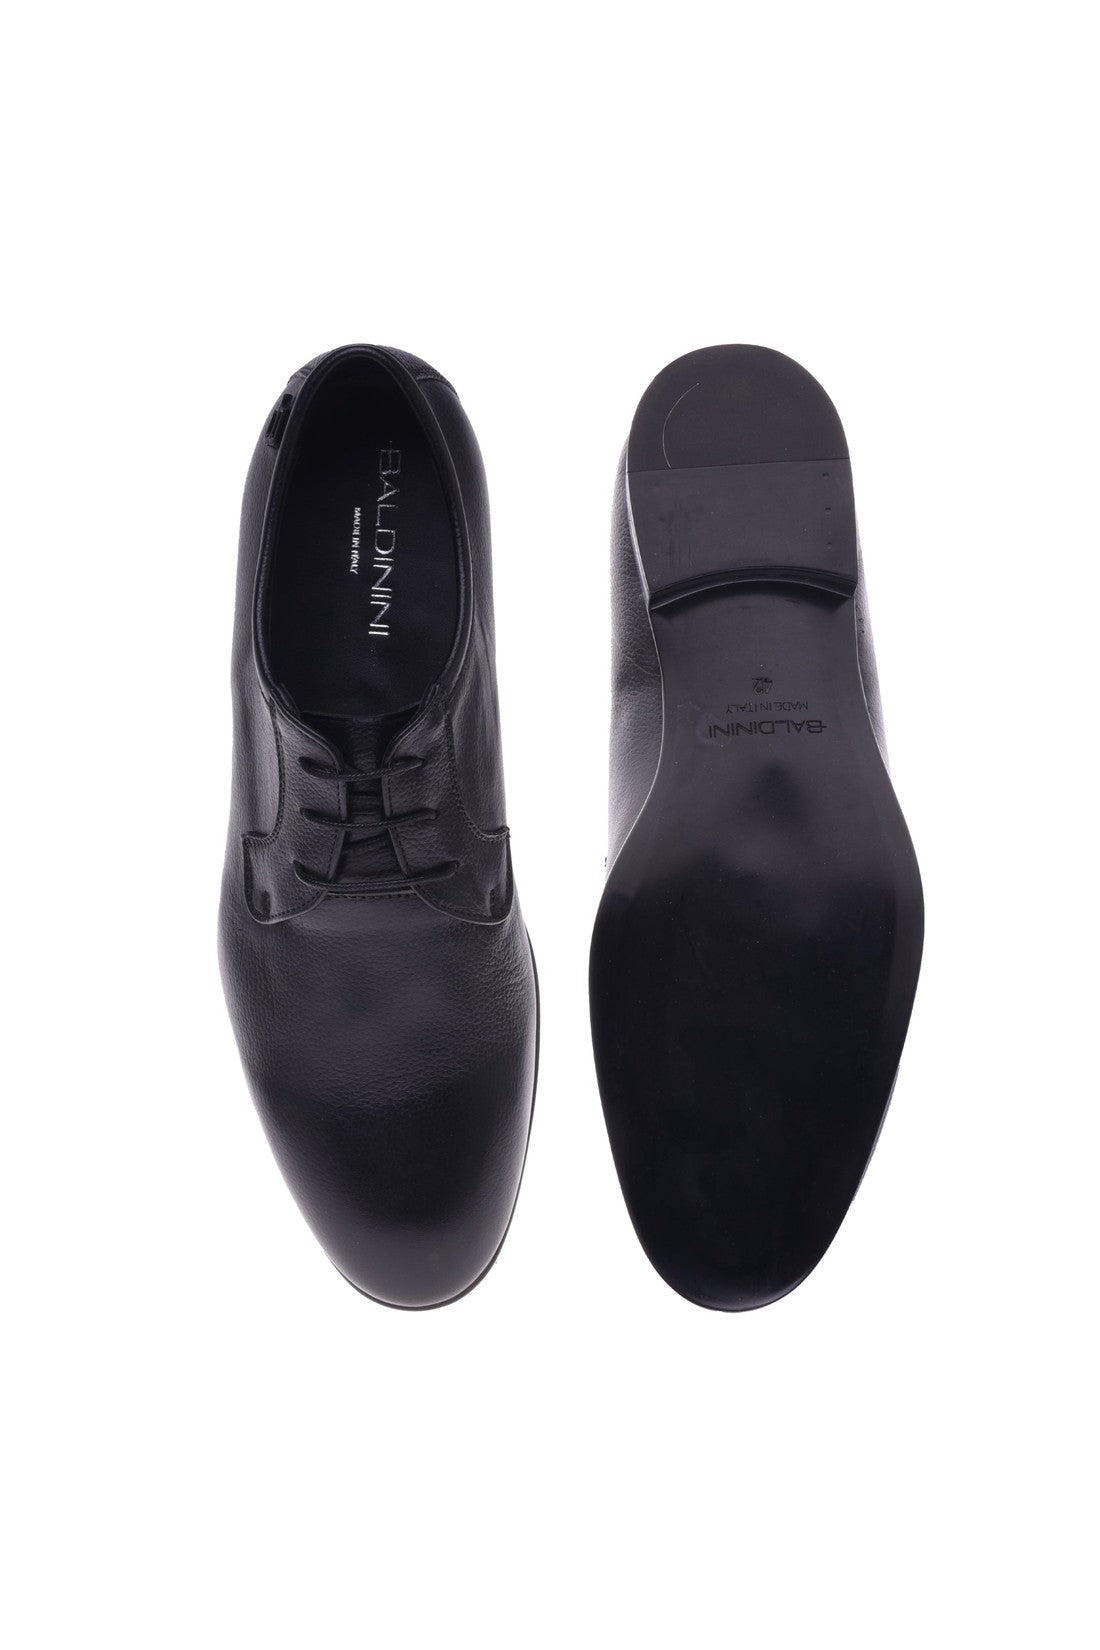 Black tumbled leather derby